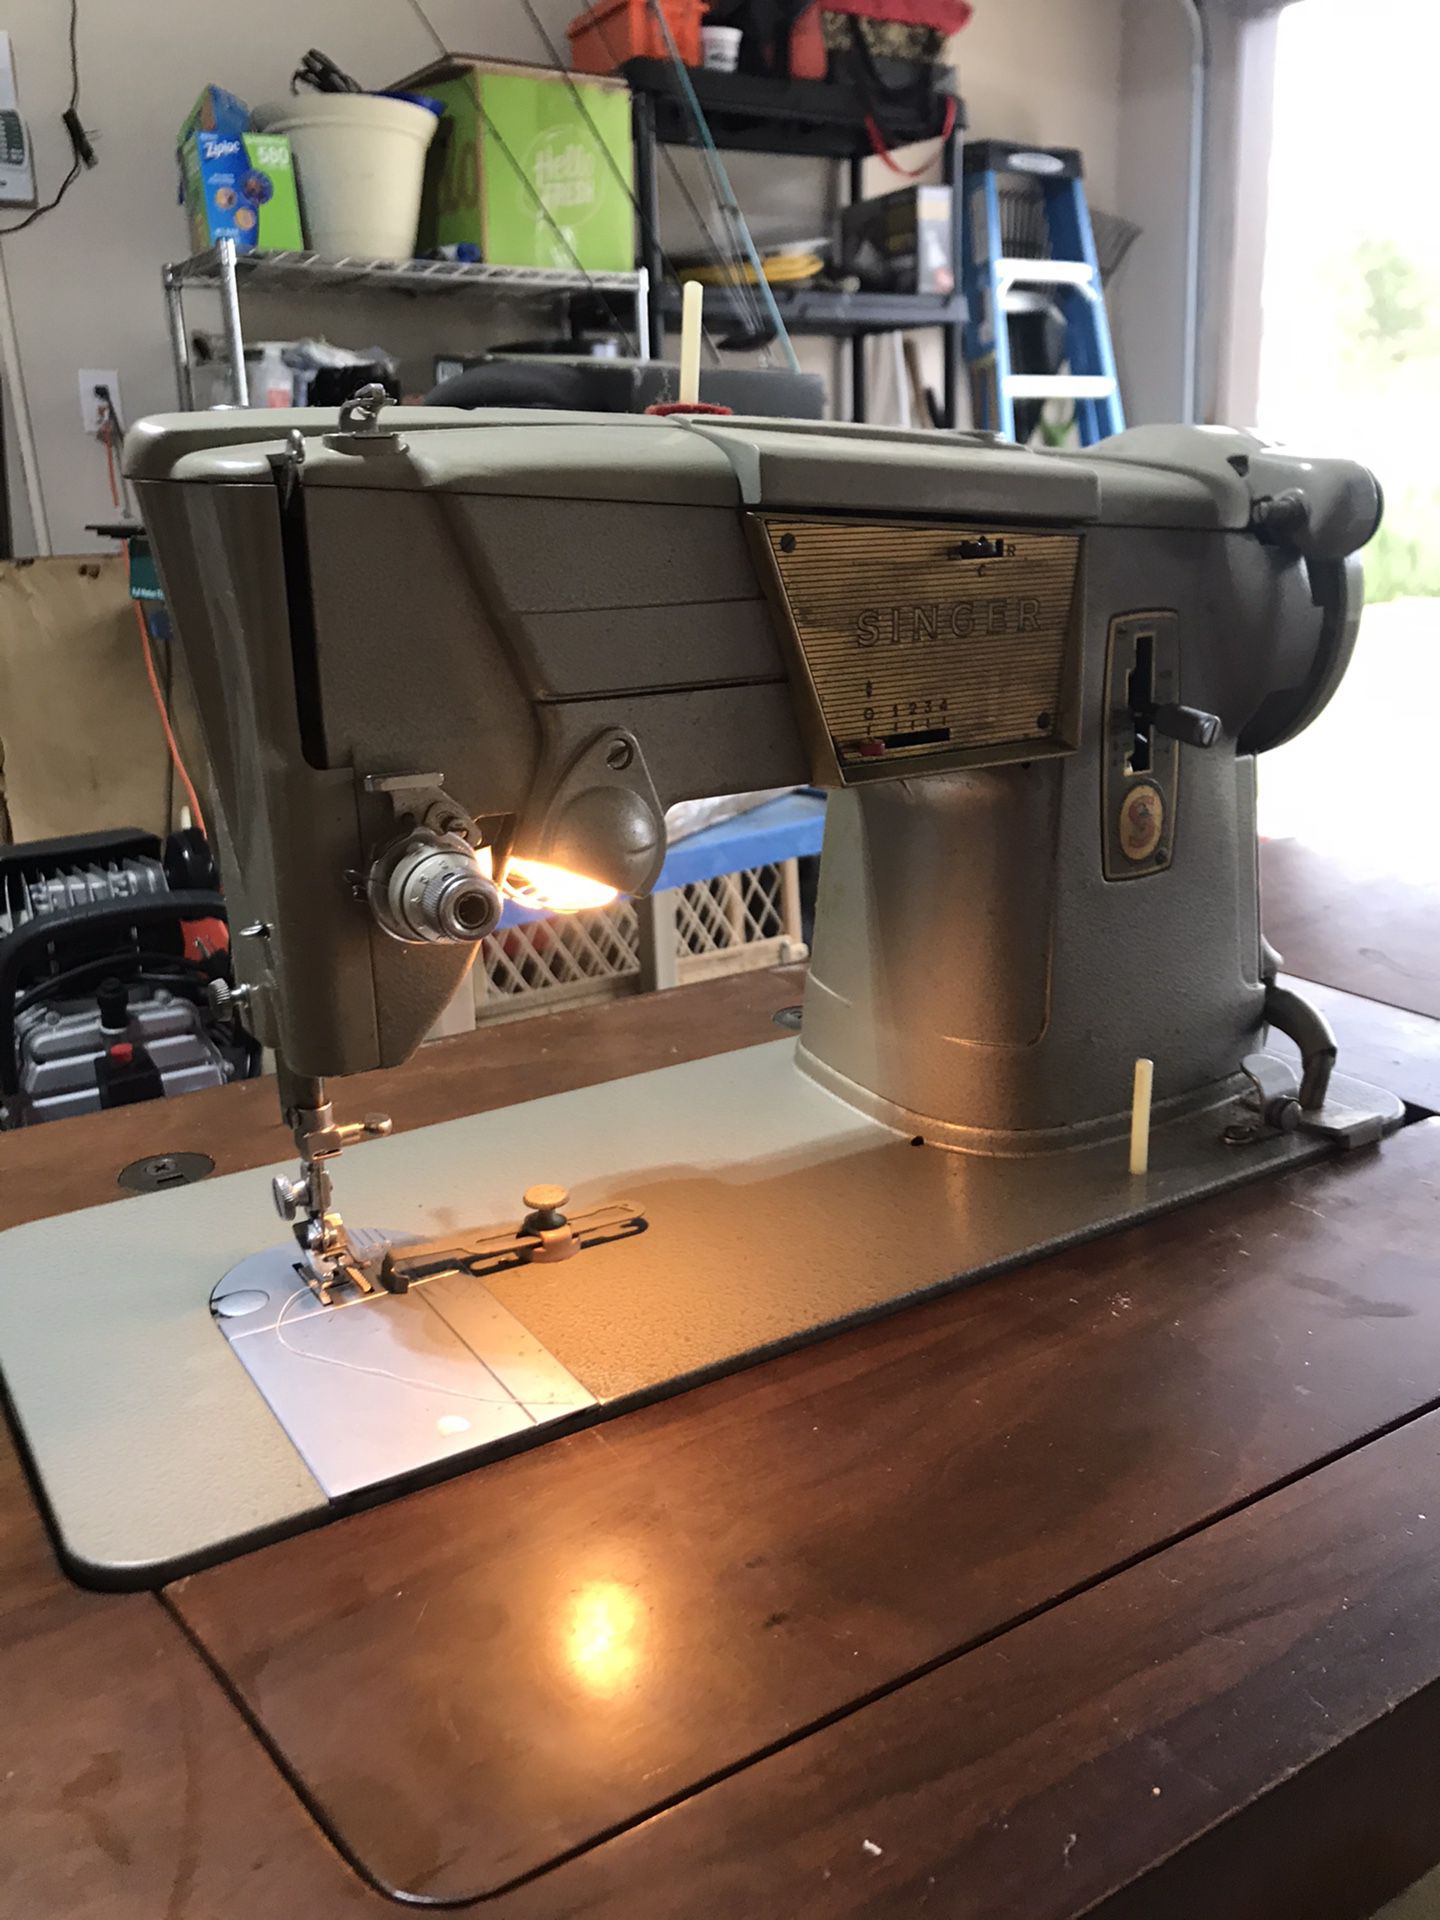 Vintage model singer 328 sewing machine in its on table